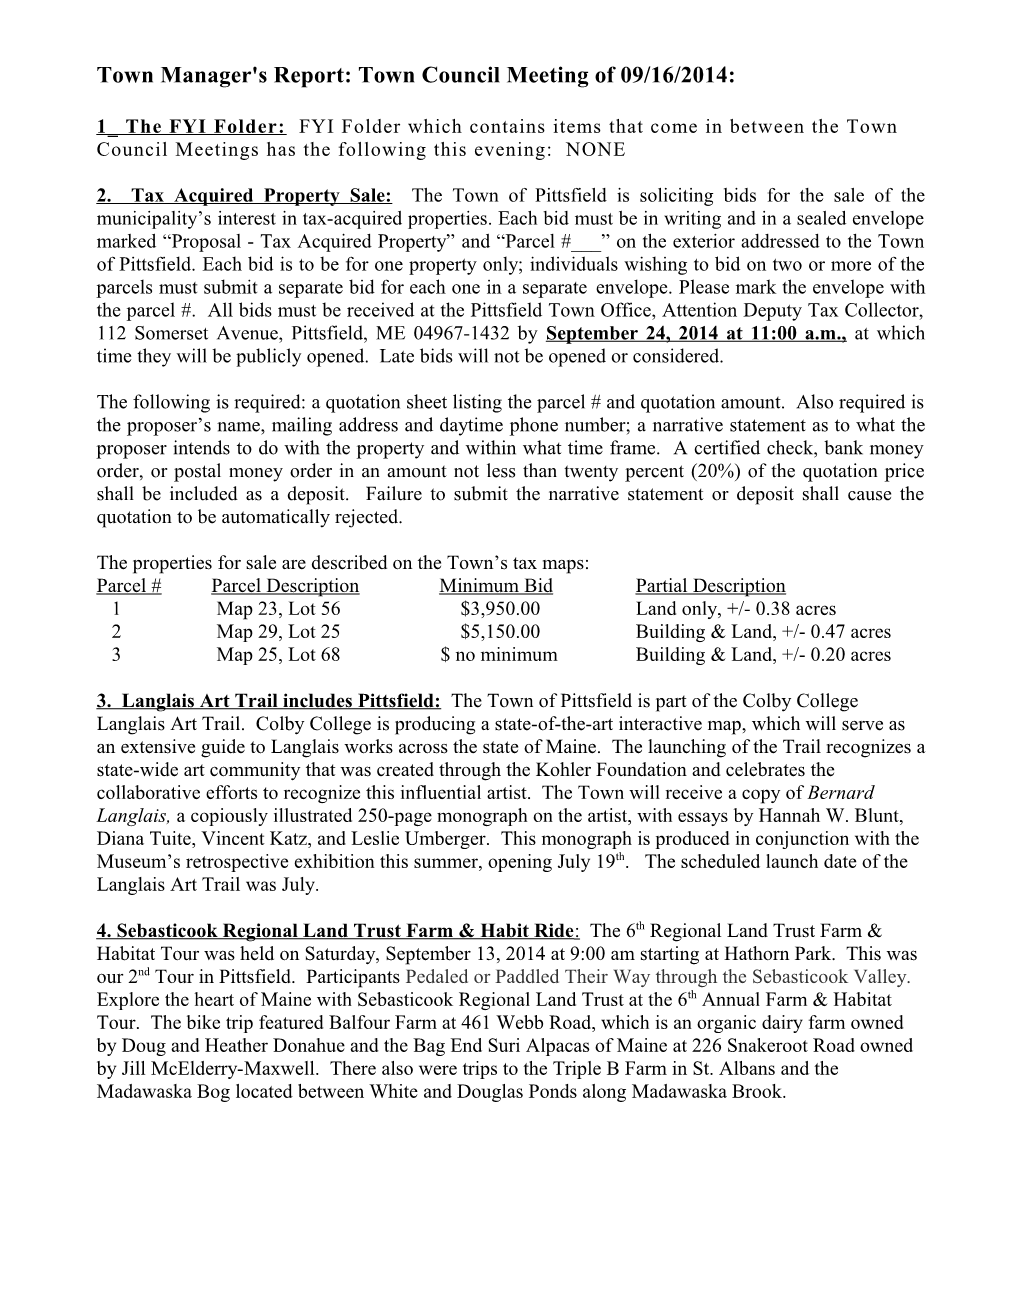 Town Manager's Report: Town Council Meeting of 10/04/2011